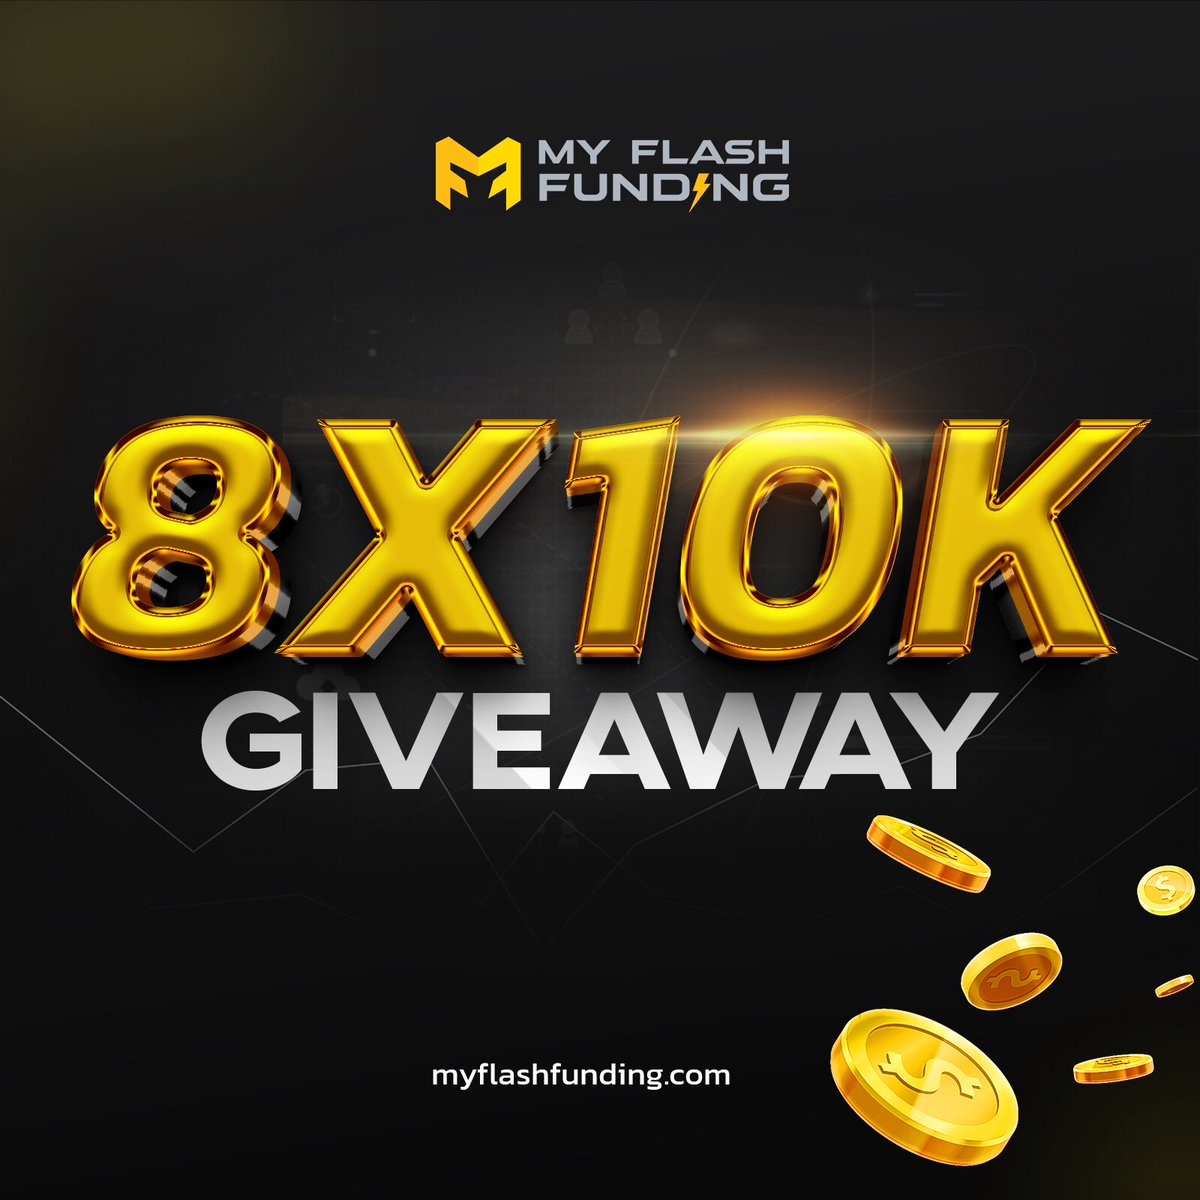 I’ll be giving away

Prizes: 8x $10k Challenge Accounts🎁

To Enter:
-Follow @myflashfunding, @_RichTrades_ & @blakemyff 

-Like + Repost 

-Tag 4 friends

-Turn on post notifications.

Join Discord: discord.gg/myflashfunding 
Ends in 72 hours⏳